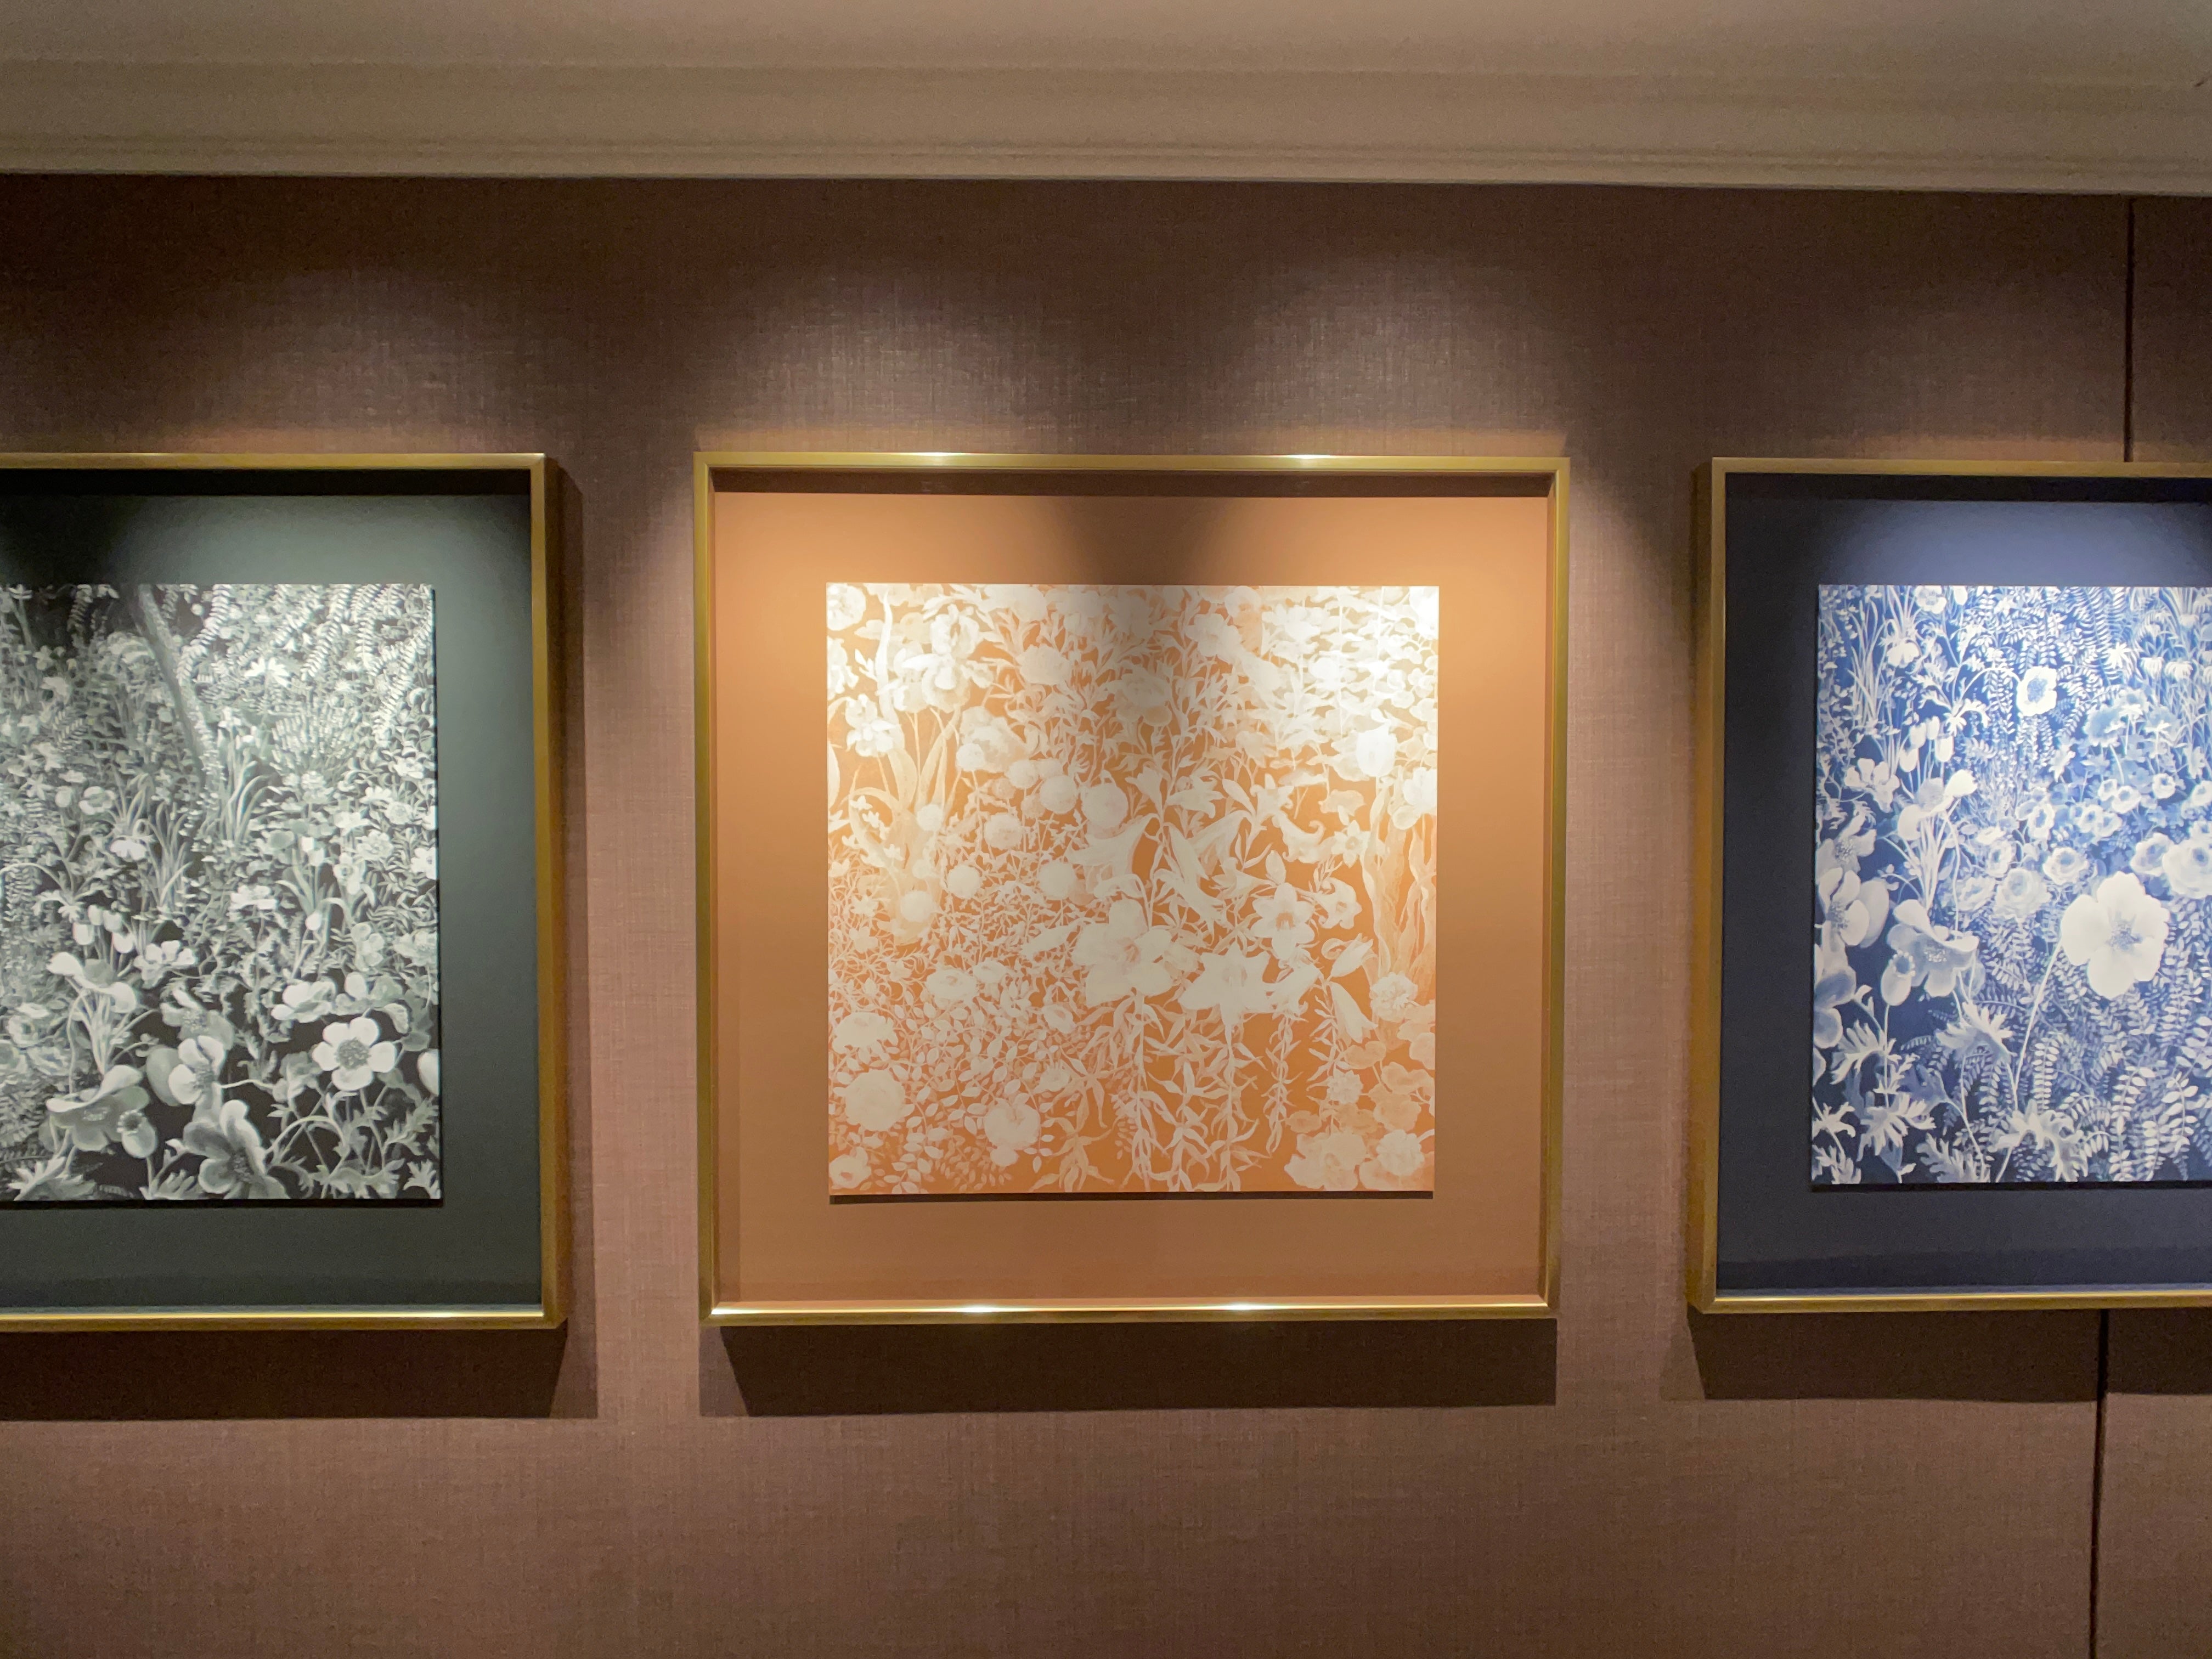 Brassy gold framed prints, one black, one yellow ochre and one navy blue, by Alice Denison hang in a row on the wall.